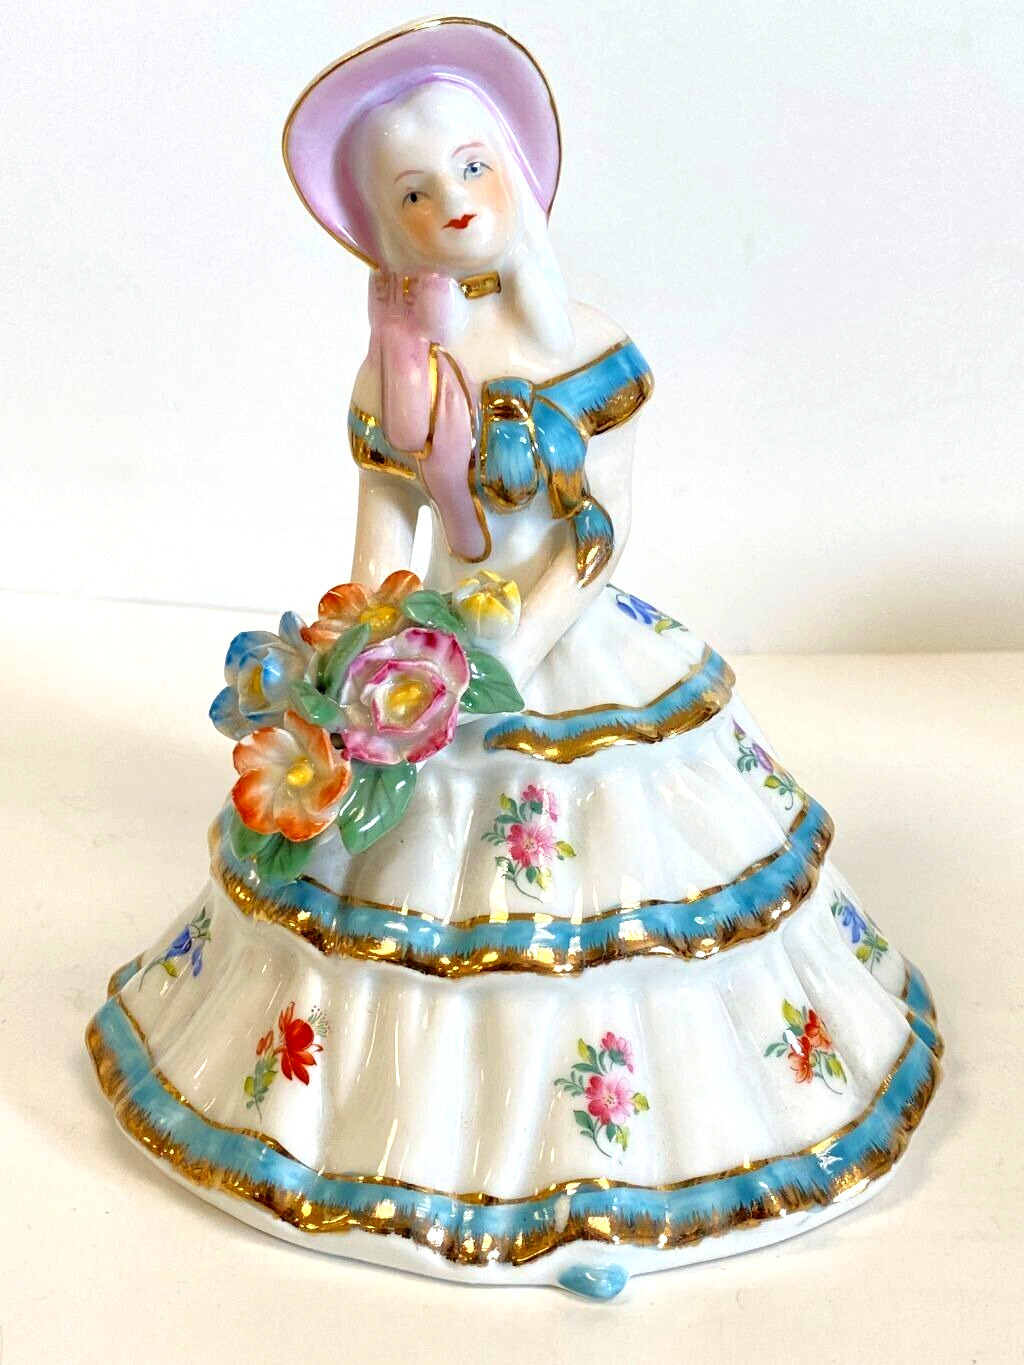 Vintage Southern Belle Porcelain Figurine White Dress Flowers Gold Accents China